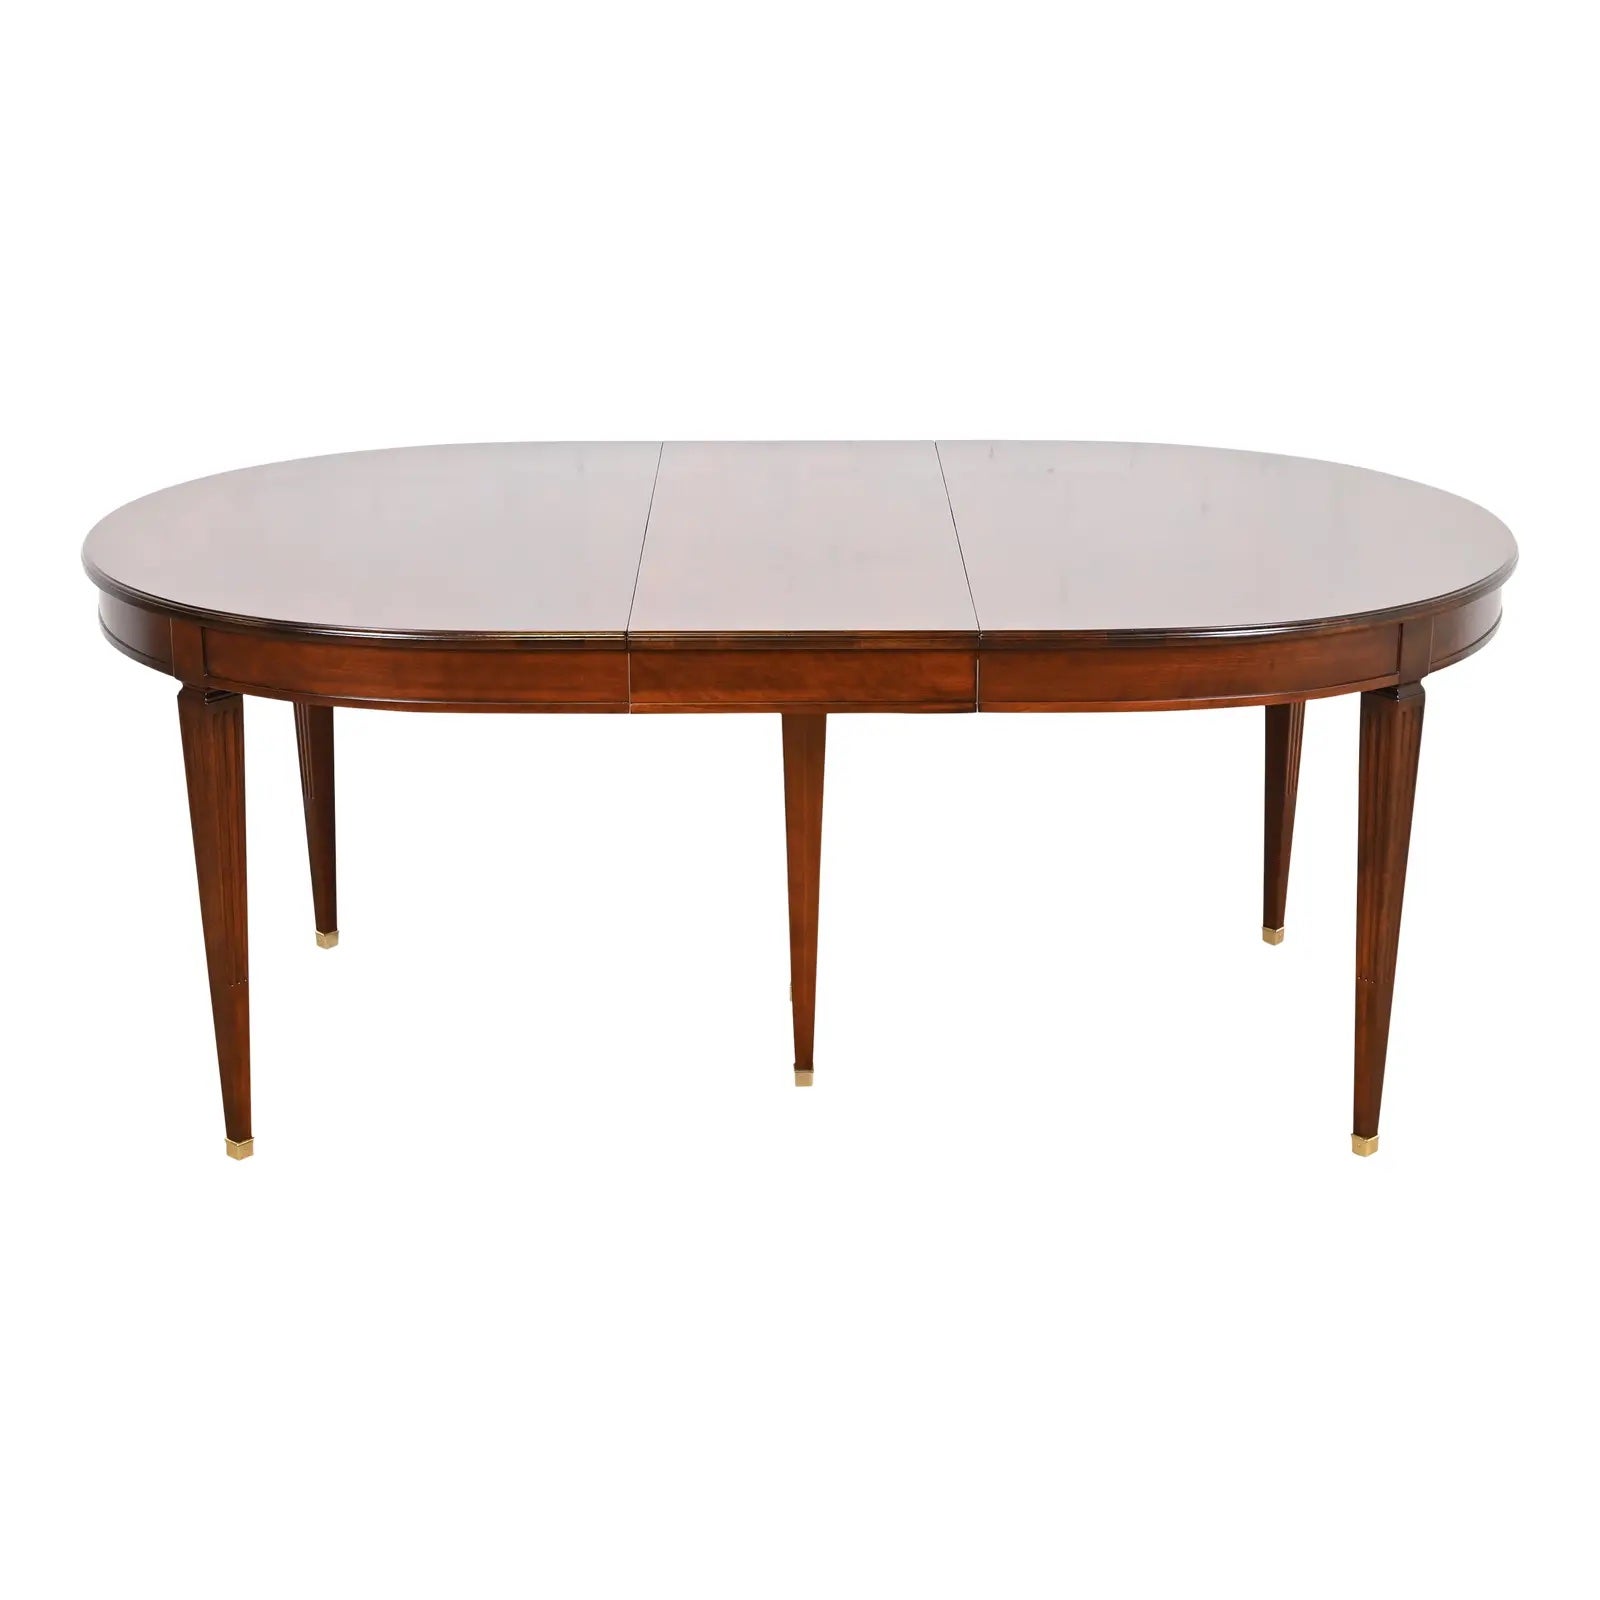 Kindel Furniture French Regency Louis XVI Cherry Wood Dining Table, Refinished